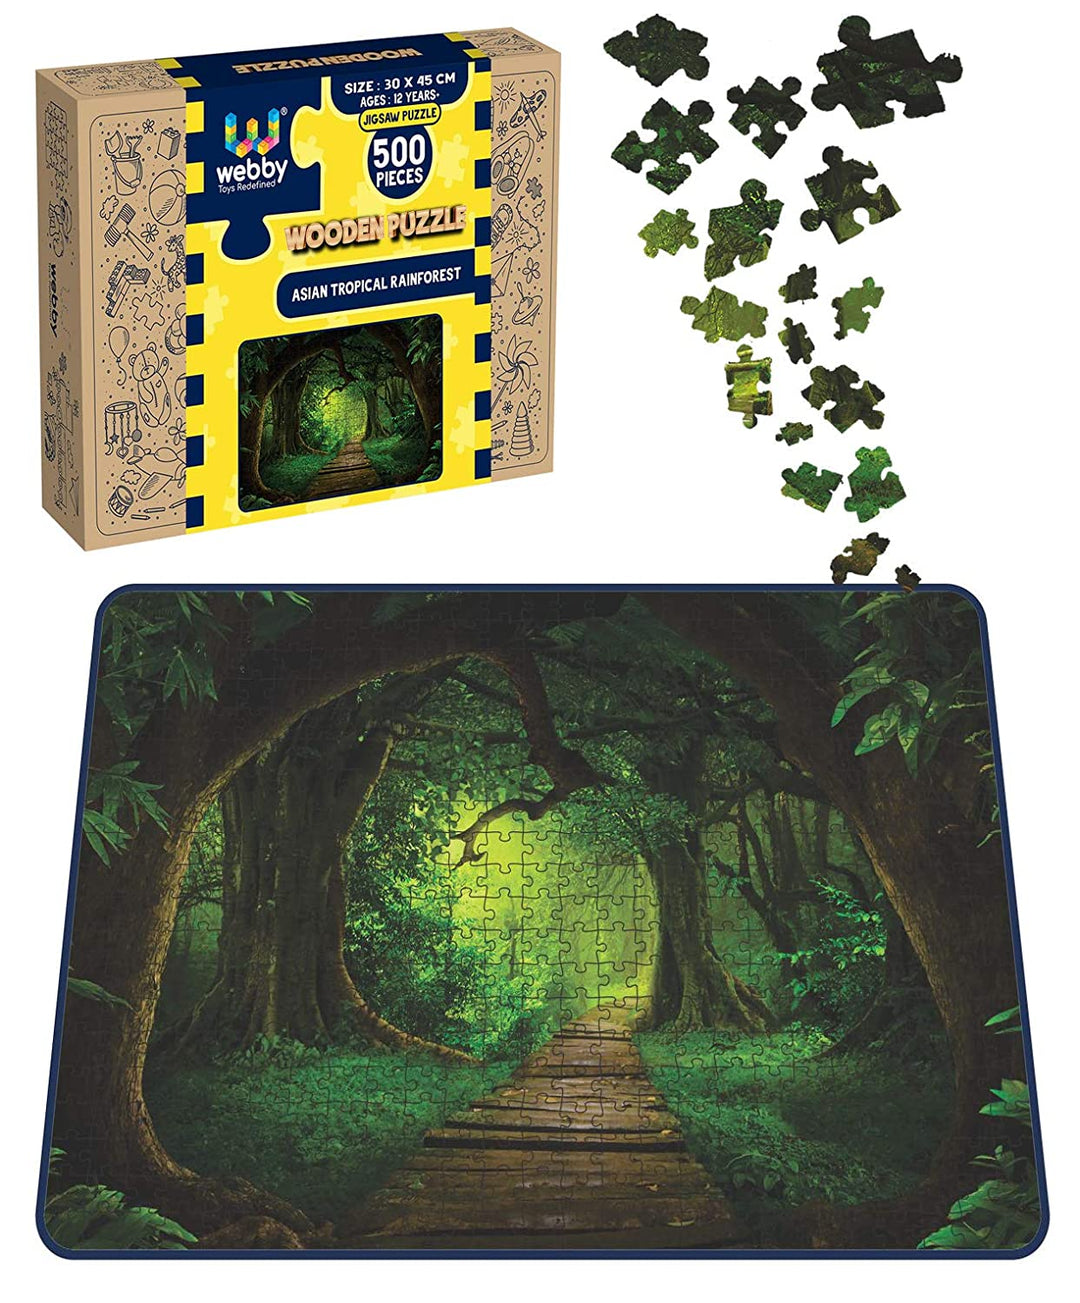 Webby Asian Tropical Rainforest Wooden Jigsaw Puzzle, 500 pieces